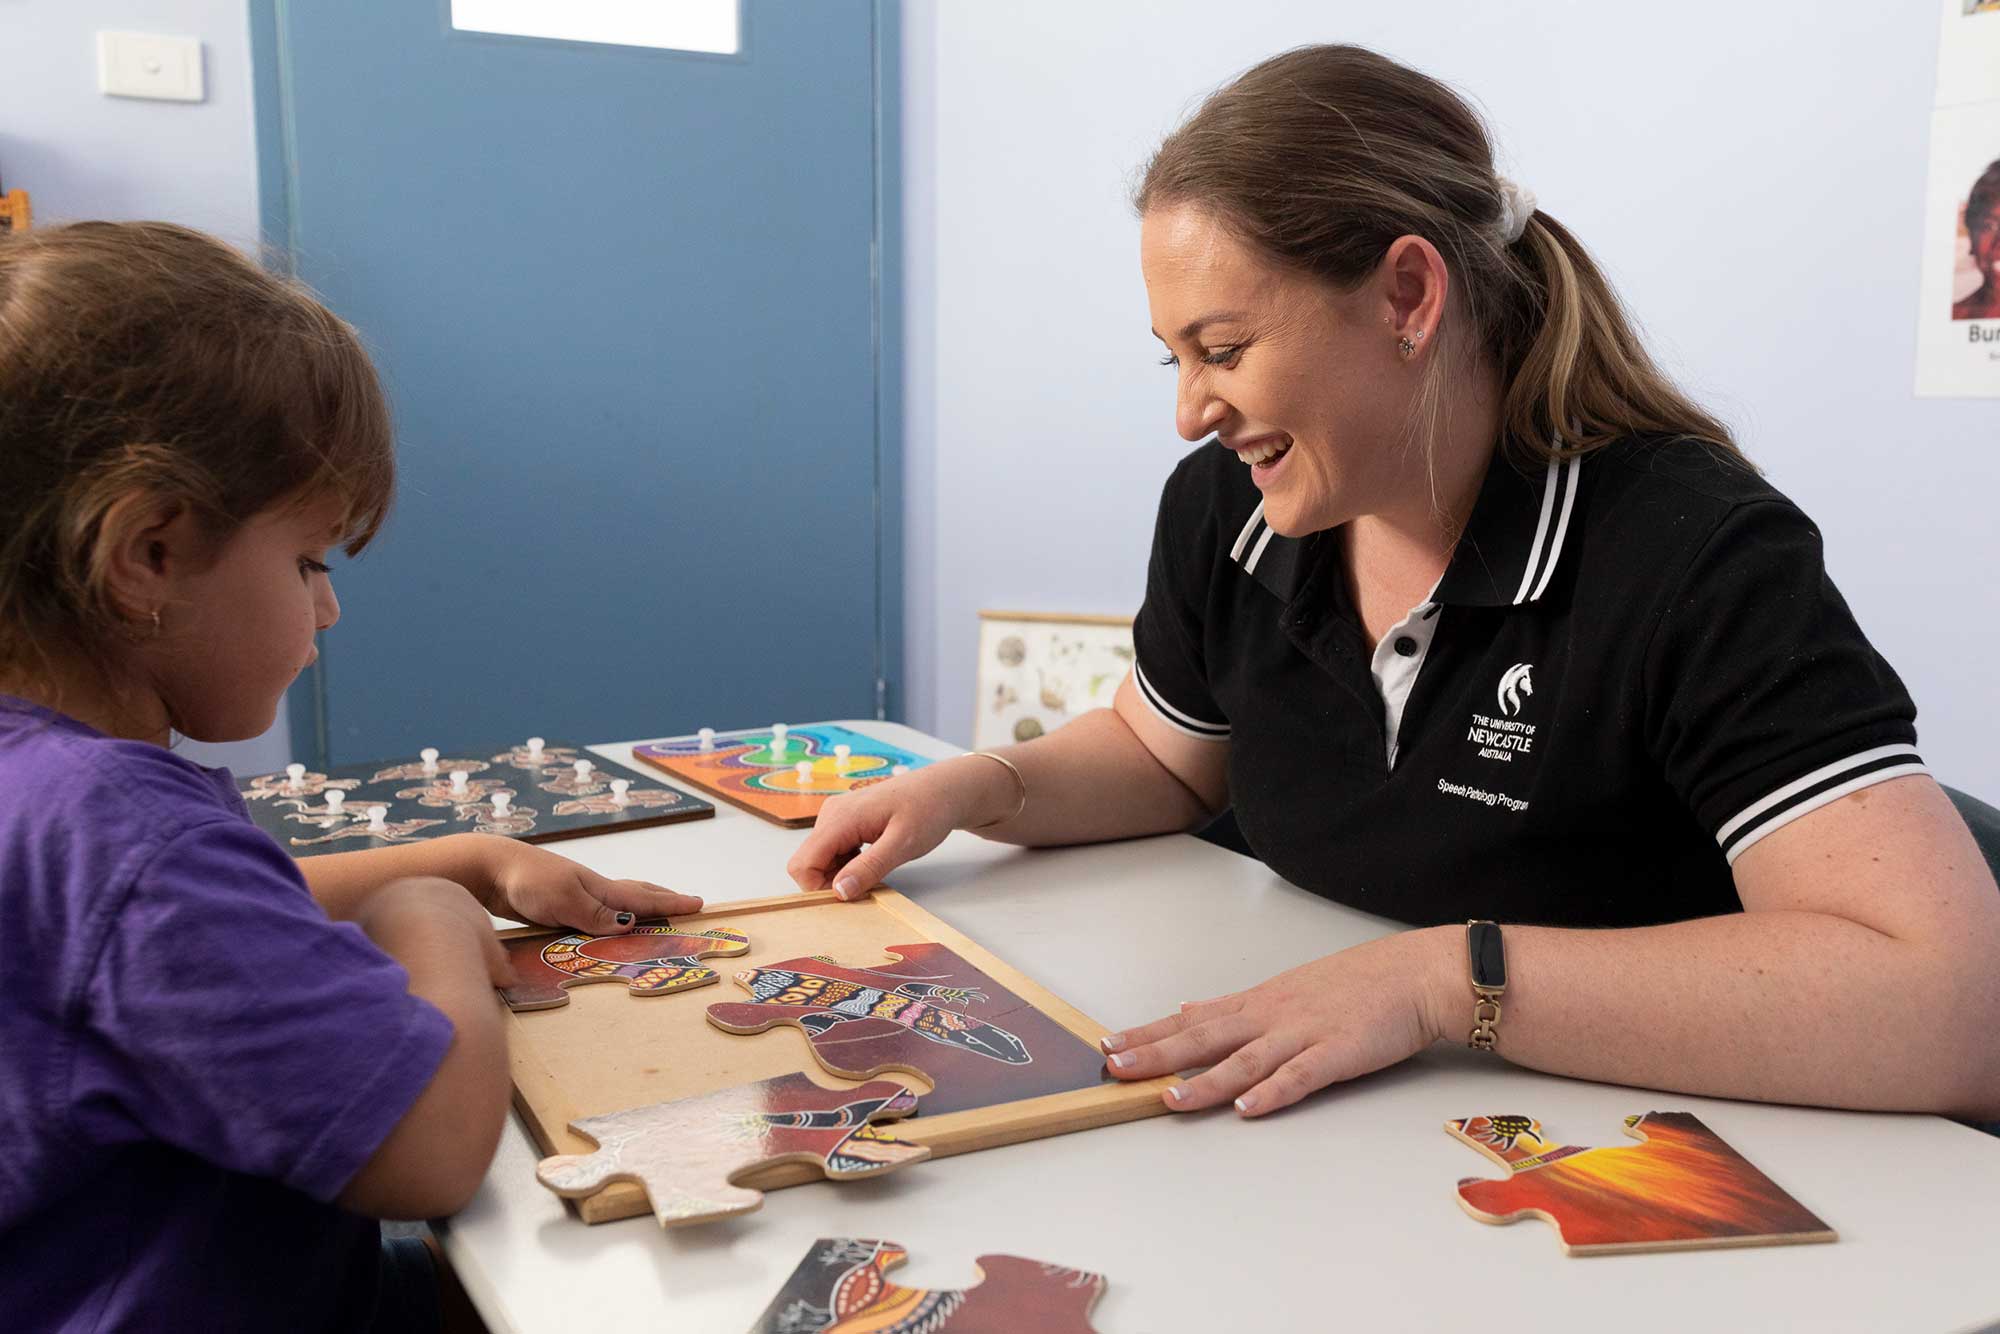 Speech pathology student playing with a puzzle with young patient.